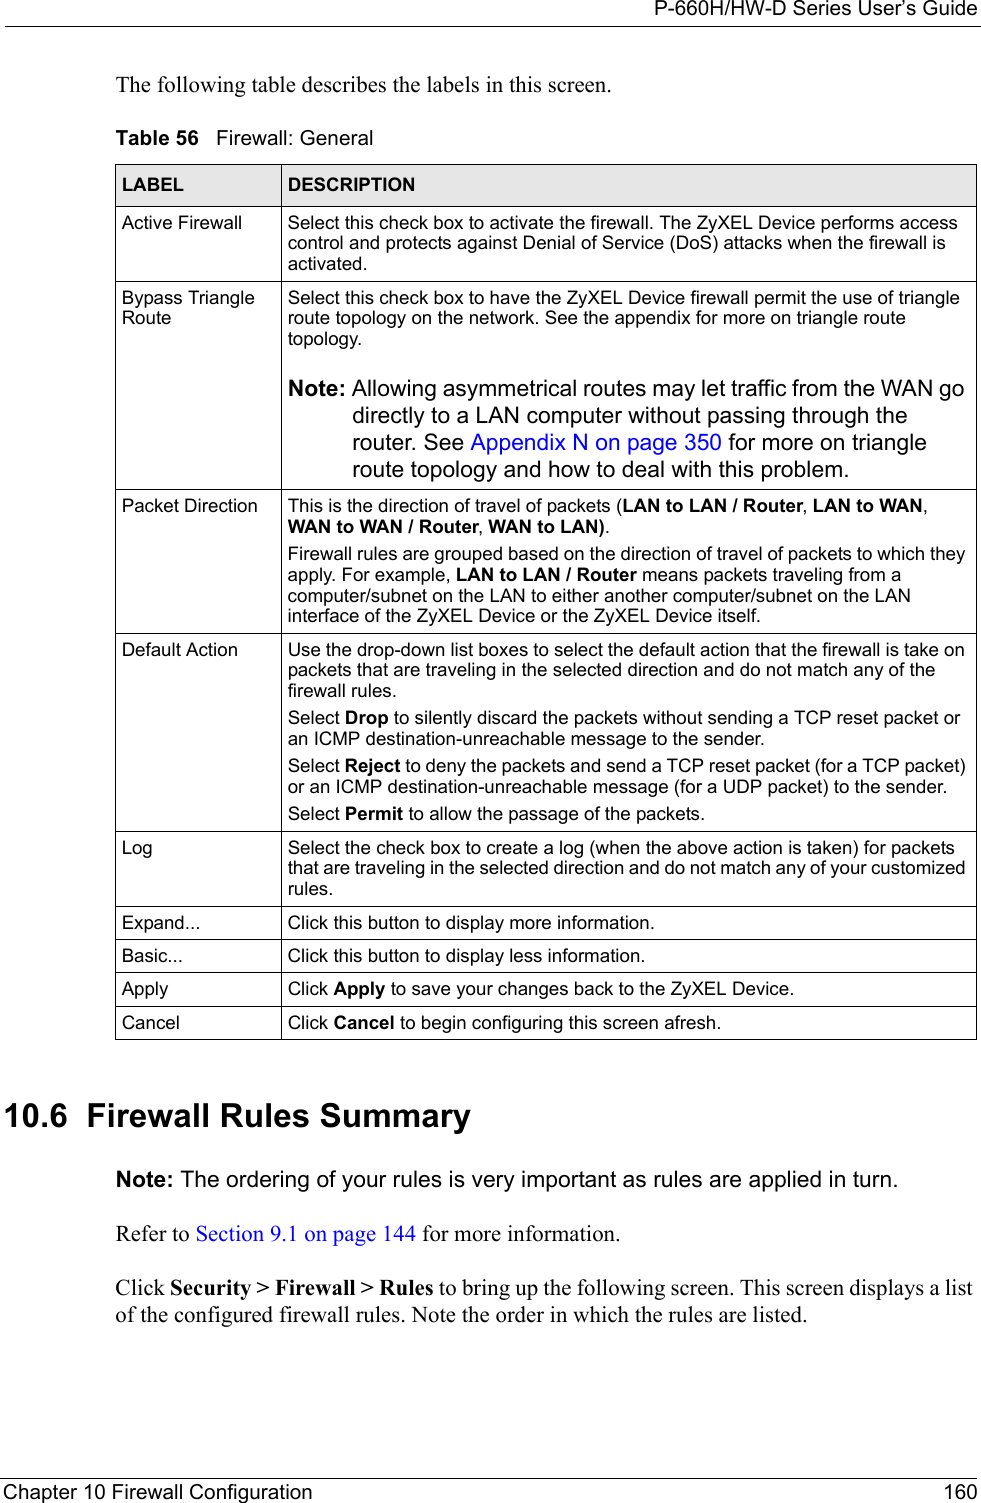 P-660H/HW-D Series User’s GuideChapter 10 Firewall Configuration 160The following table describes the labels in this screen. 10.6  Firewall Rules Summary Note: The ordering of your rules is very important as rules are applied in turn.Refer to Section 9.1 on page 144 for more information. Click Security &gt; Firewall &gt; Rules to bring up the following screen. This screen displays a list of the configured firewall rules. Note the order in which the rules are listed.Table 56   Firewall: GeneralLABEL DESCRIPTIONActive Firewall Select this check box to activate the firewall. The ZyXEL Device performs access control and protects against Denial of Service (DoS) attacks when the firewall is activated.Bypass Triangle RouteSelect this check box to have the ZyXEL Device firewall permit the use of triangle route topology on the network. See the appendix for more on triangle route topology.Note: Allowing asymmetrical routes may let traffic from the WAN go directly to a LAN computer without passing through the router. See Appendix N on page 350 for more on triangle route topology and how to deal with this problem.Packet Direction This is the direction of travel of packets (LAN to LAN / Router, LAN to WAN, WAN to WAN / Router, WAN to LAN).Firewall rules are grouped based on the direction of travel of packets to which they apply. For example, LAN to LAN / Router means packets traveling from a computer/subnet on the LAN to either another computer/subnet on the LAN interface of the ZyXEL Device or the ZyXEL Device itself. Default Action Use the drop-down list boxes to select the default action that the firewall is take on packets that are traveling in the selected direction and do not match any of the firewall rules. Select Drop to silently discard the packets without sending a TCP reset packet or an ICMP destination-unreachable message to the sender.Select Reject to deny the packets and send a TCP reset packet (for a TCP packet) or an ICMP destination-unreachable message (for a UDP packet) to the sender.Select Permit to allow the passage of the packets.Log Select the check box to create a log (when the above action is taken) for packets that are traveling in the selected direction and do not match any of your customized rules.Expand... Click this button to display more information.Basic... Click this button to display less information.Apply Click Apply to save your changes back to the ZyXEL Device.Cancel Click Cancel to begin configuring this screen afresh.